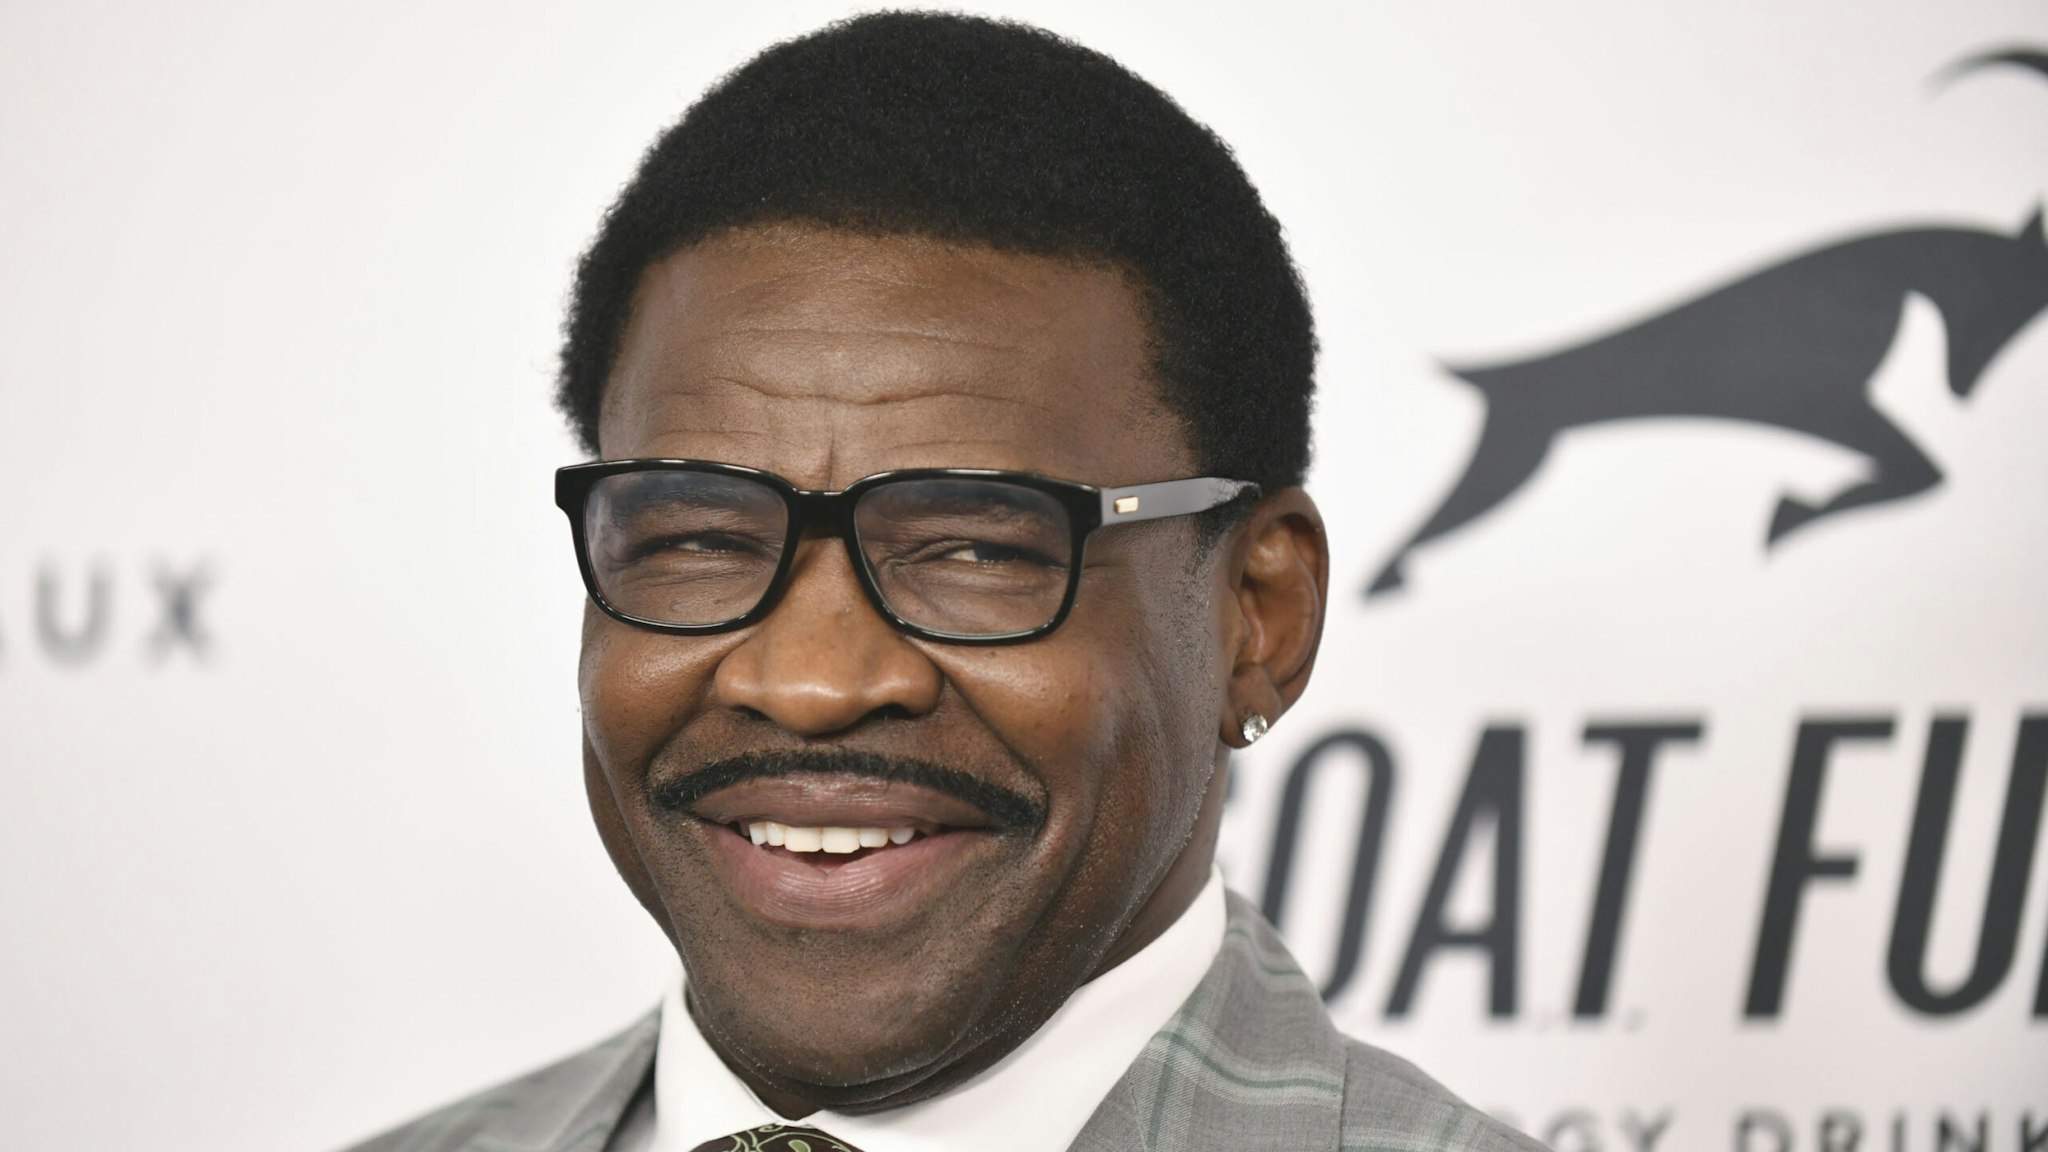 BEVERLY HILLS, CALIFORNIA - AUGUST 19: Michael Irvin attends the 2022 Harold and Carole Pump Foundation Gala at The Beverly Hilton on August 19, 2022 in Beverly Hills, California.